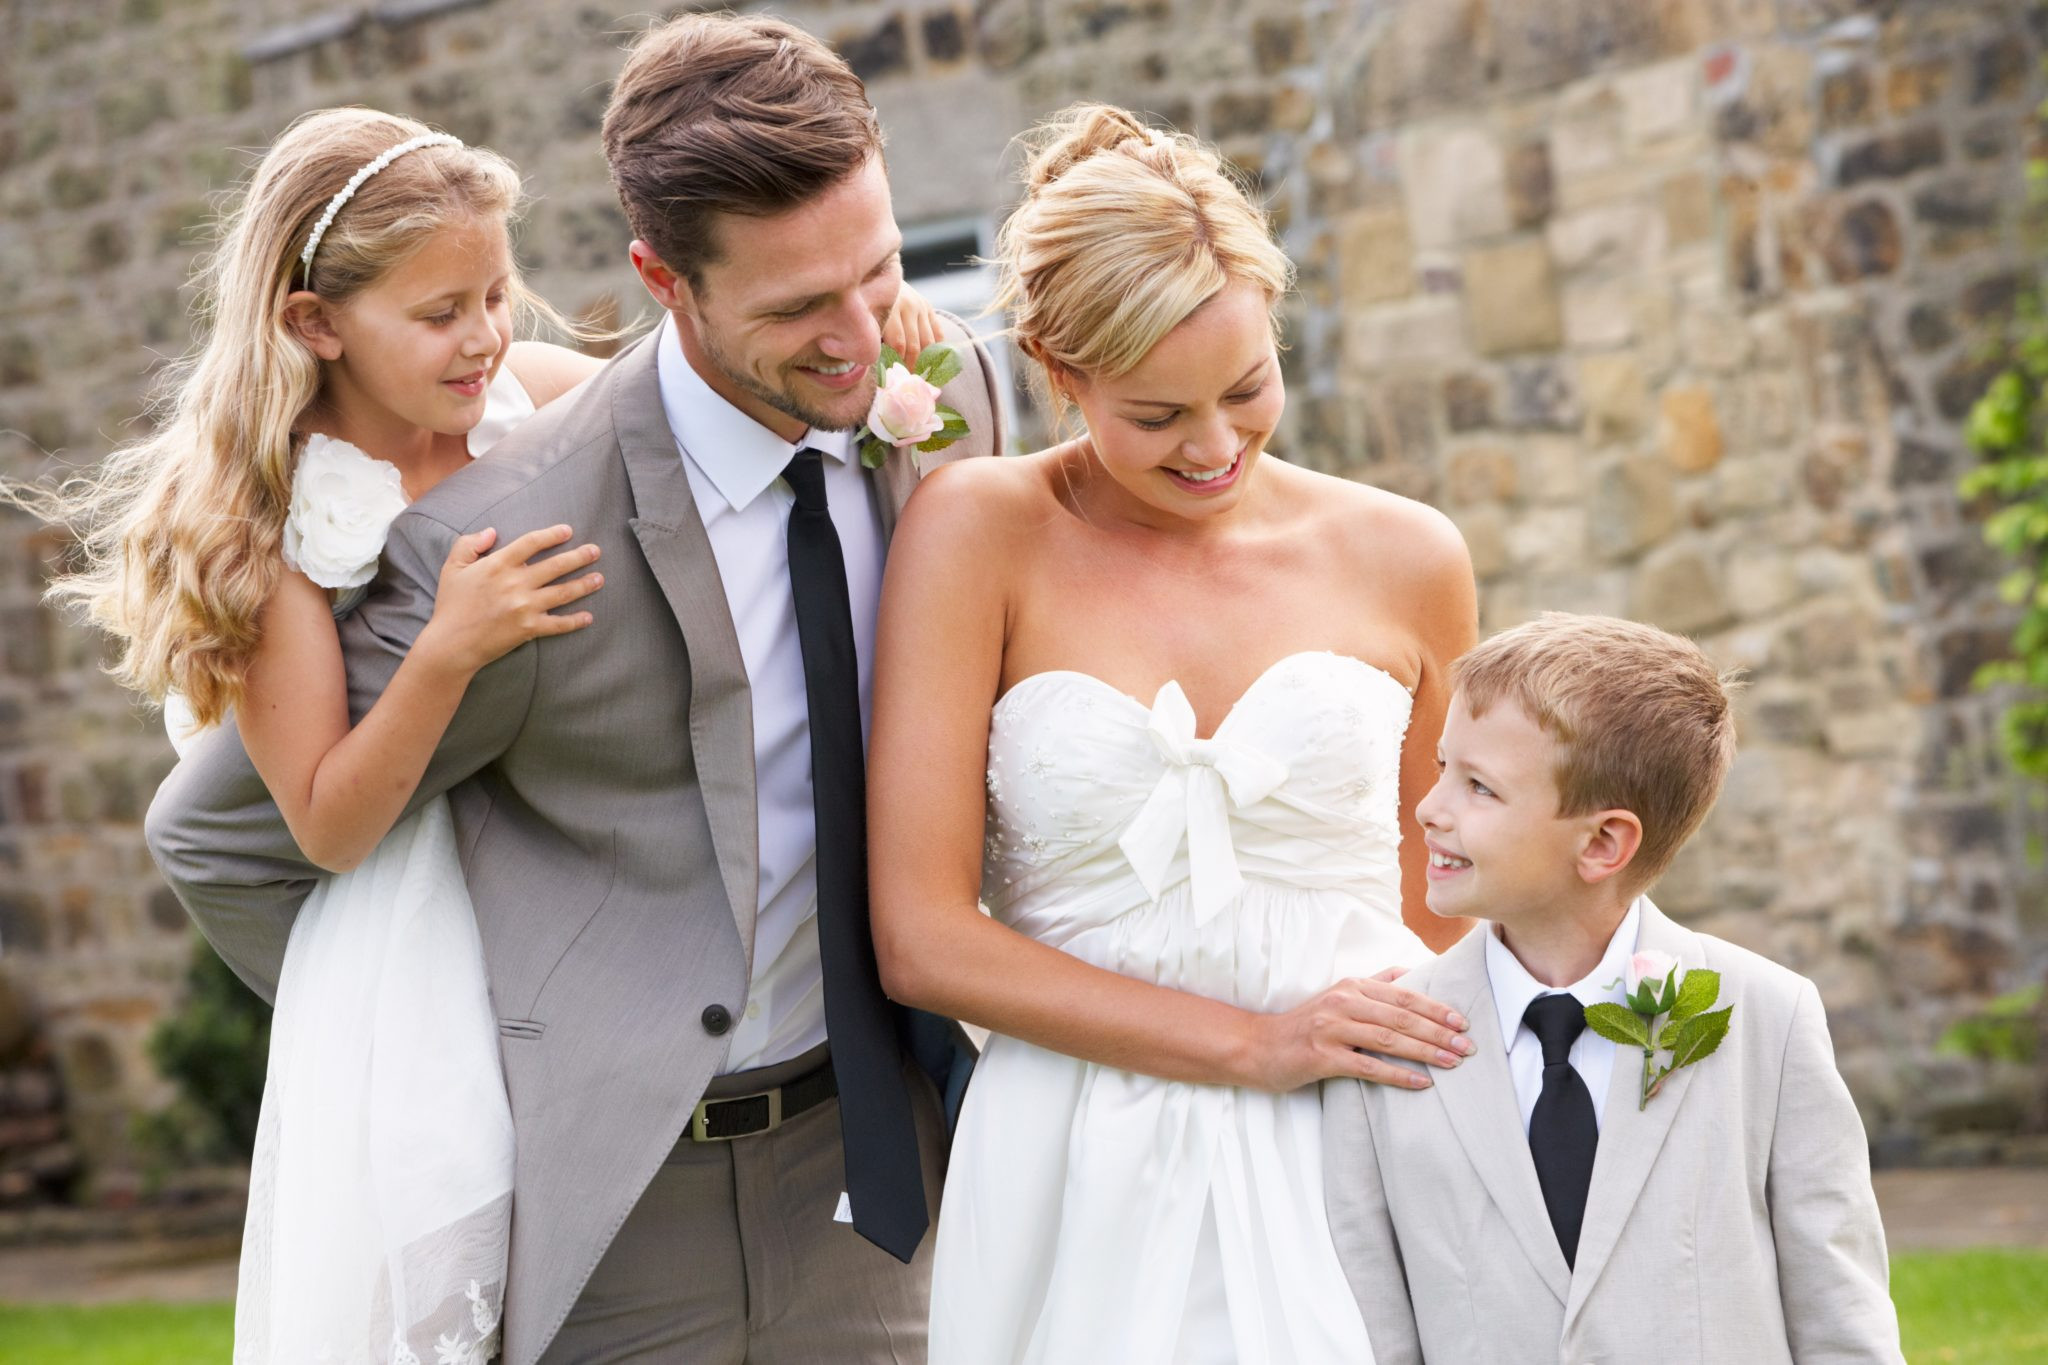 Wedding Vows With Children
 VOWS TO YOUR NEW CHILDREN It s Never Too Late Marriage